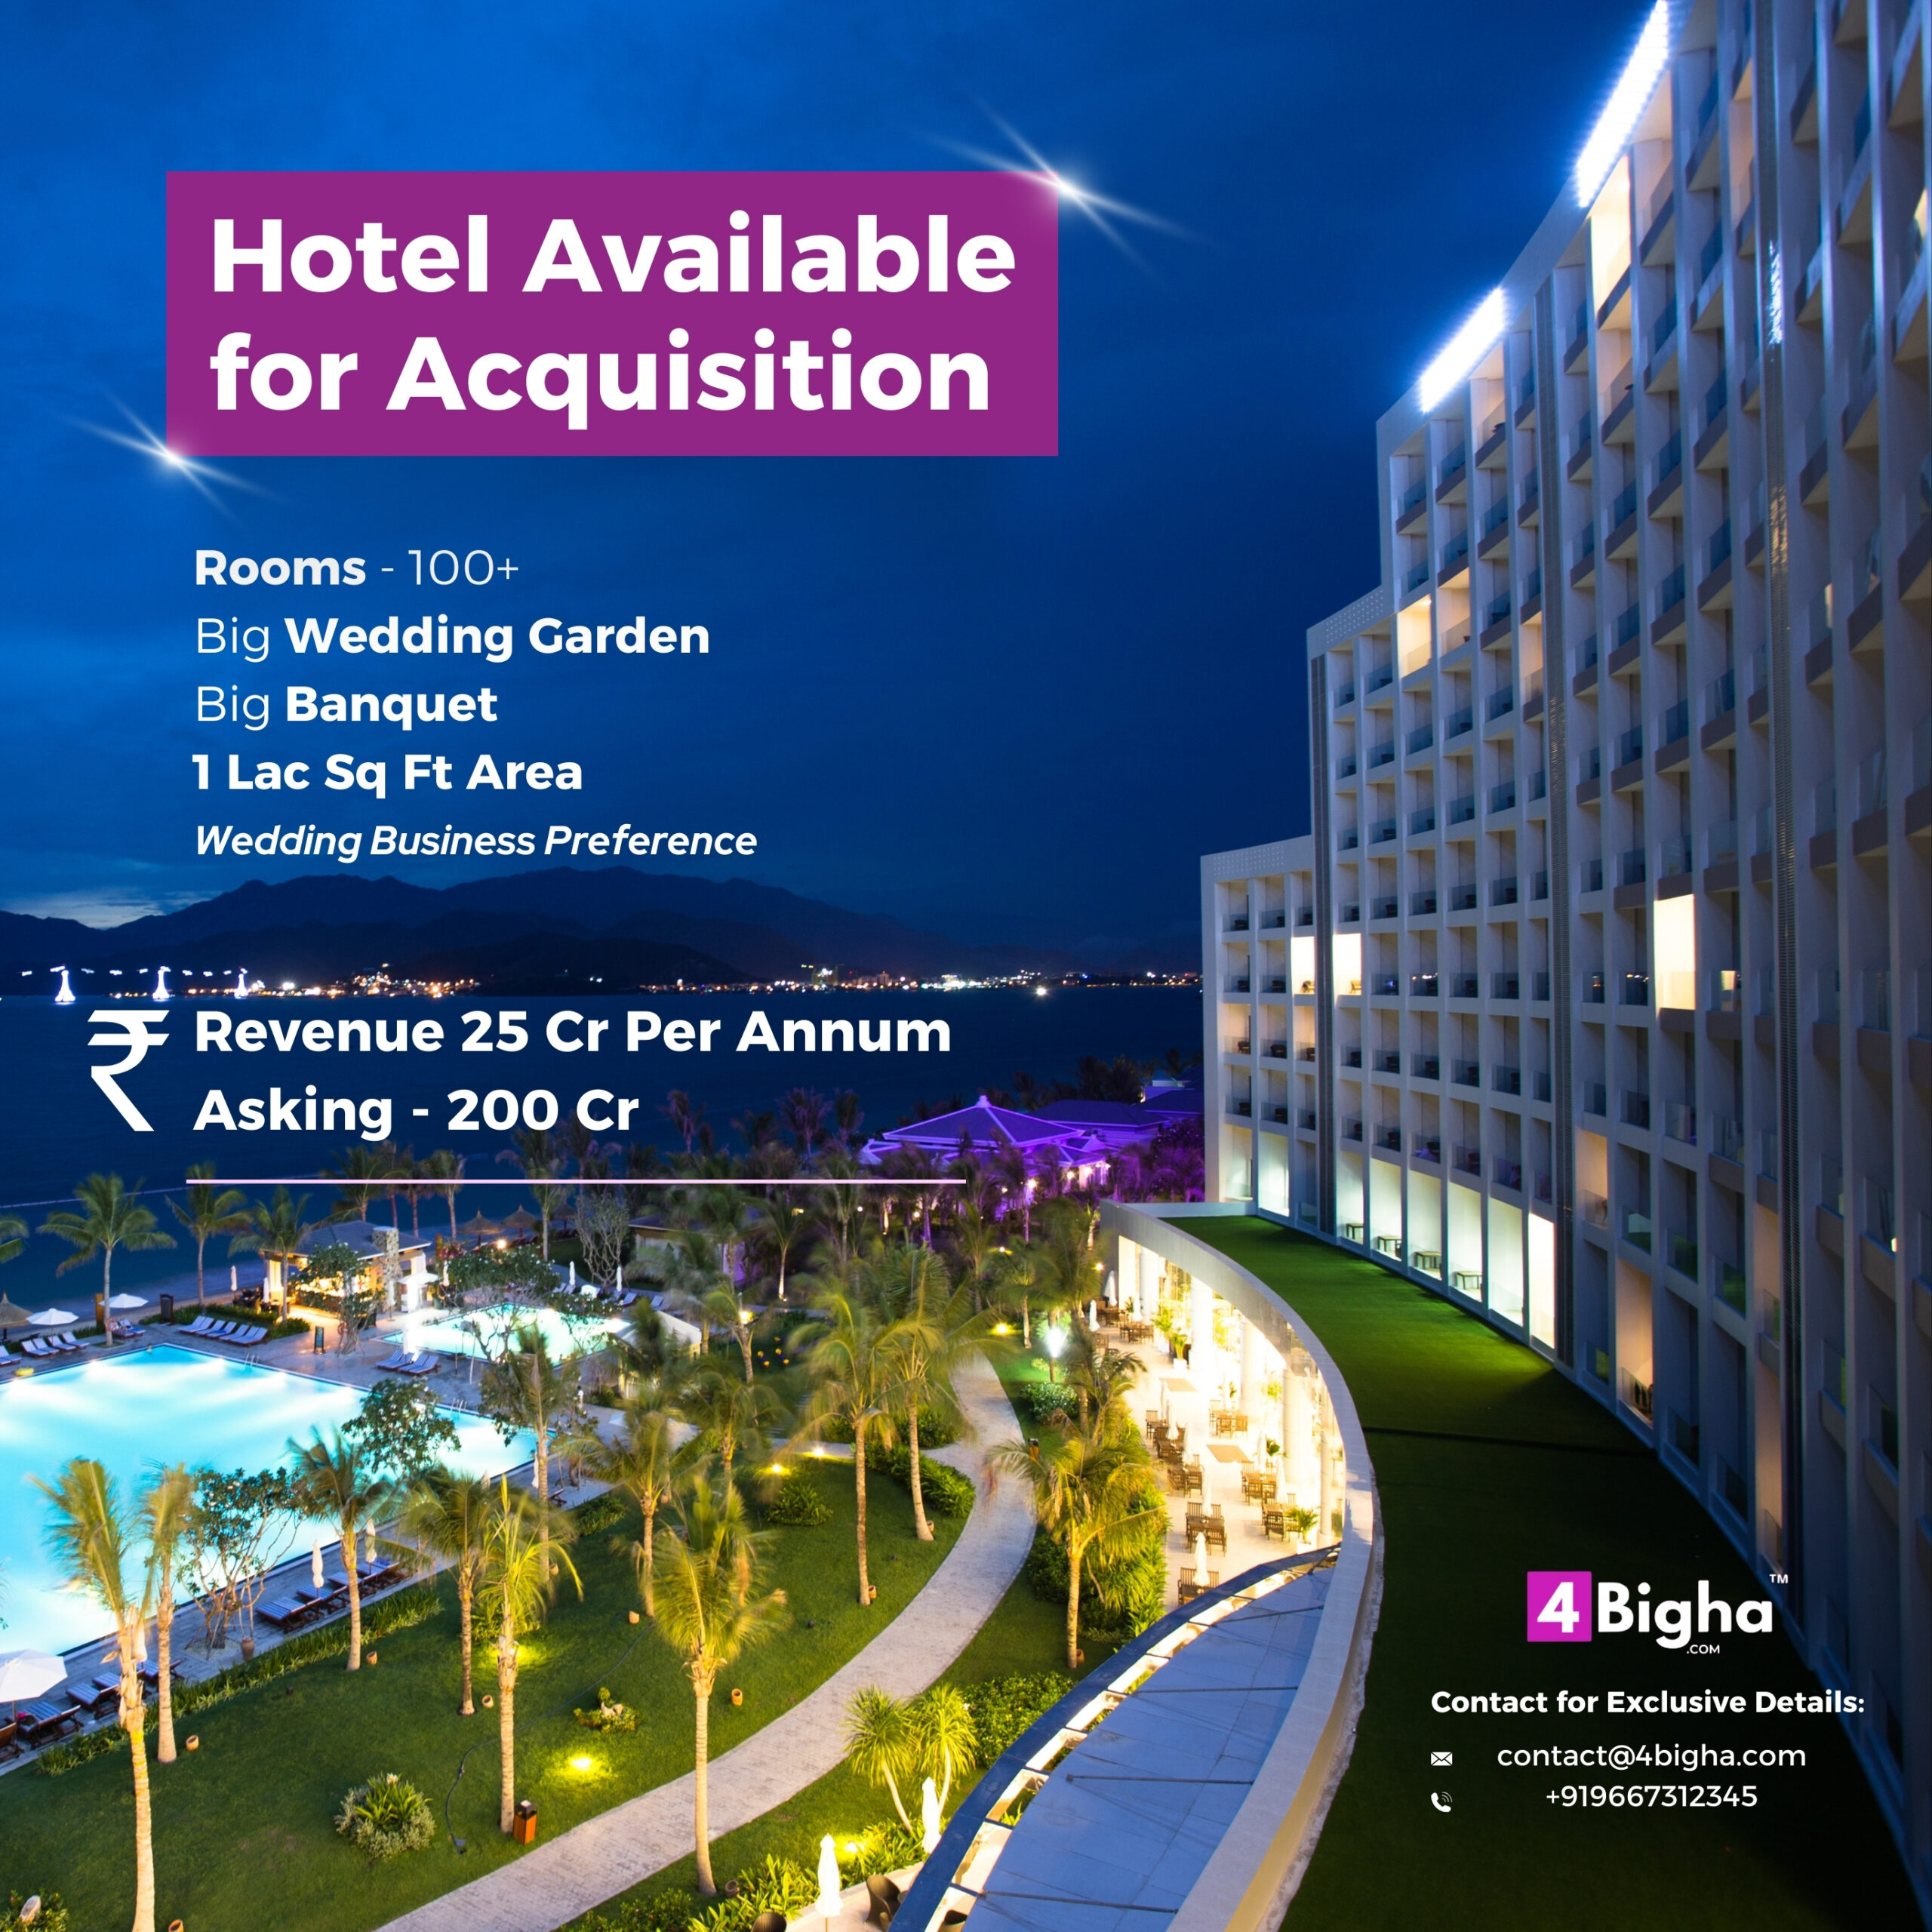 Hotel Available for Acquisition